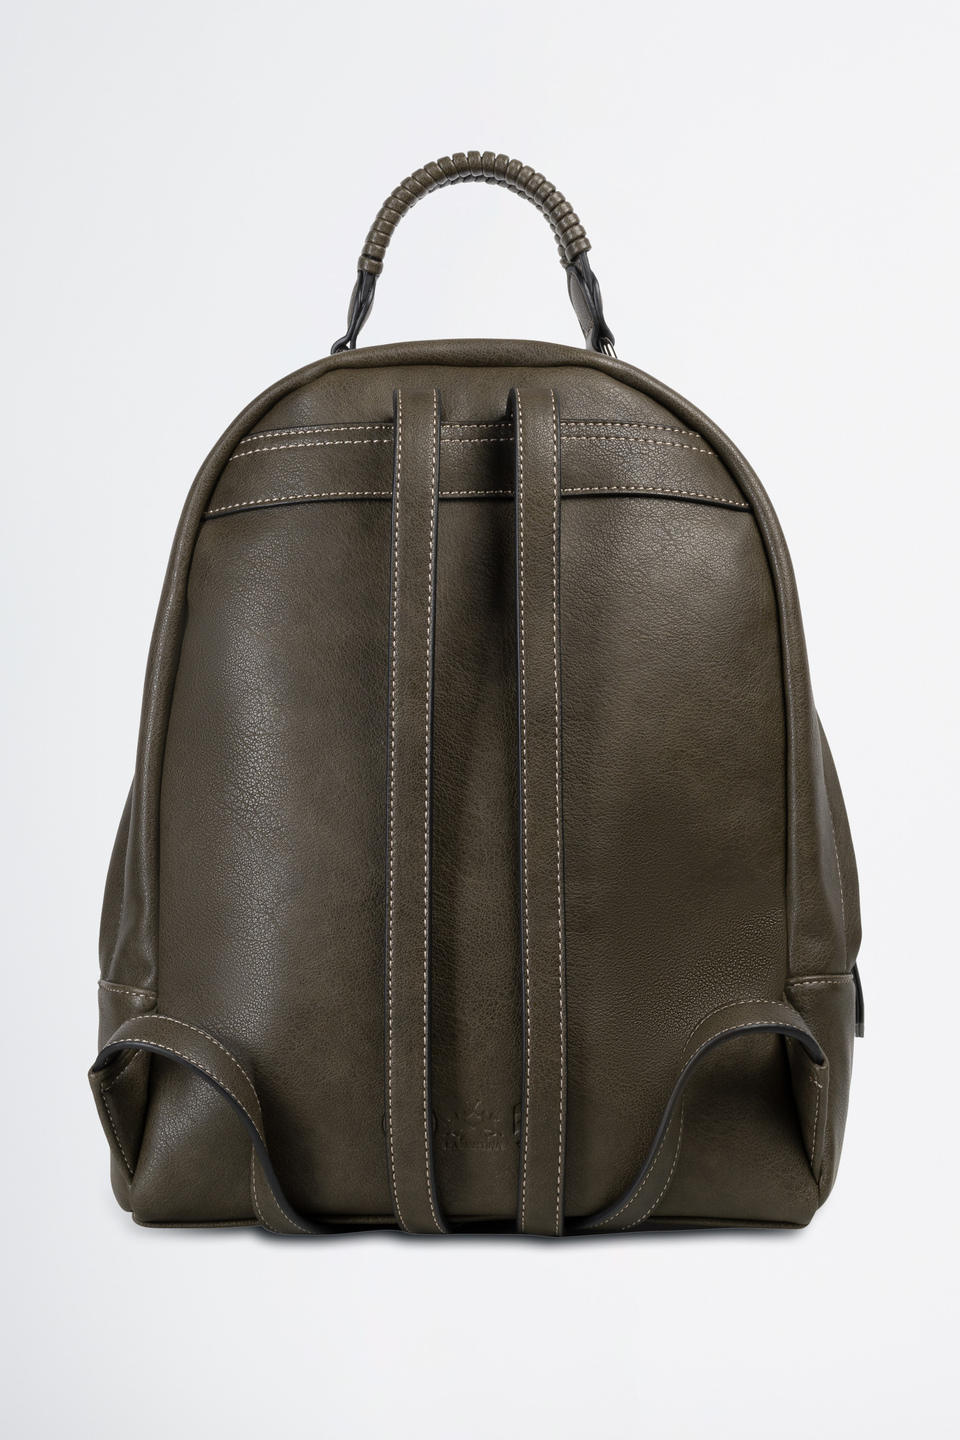 Backpack in aged PU fabric | La Martina - Official Online Shop